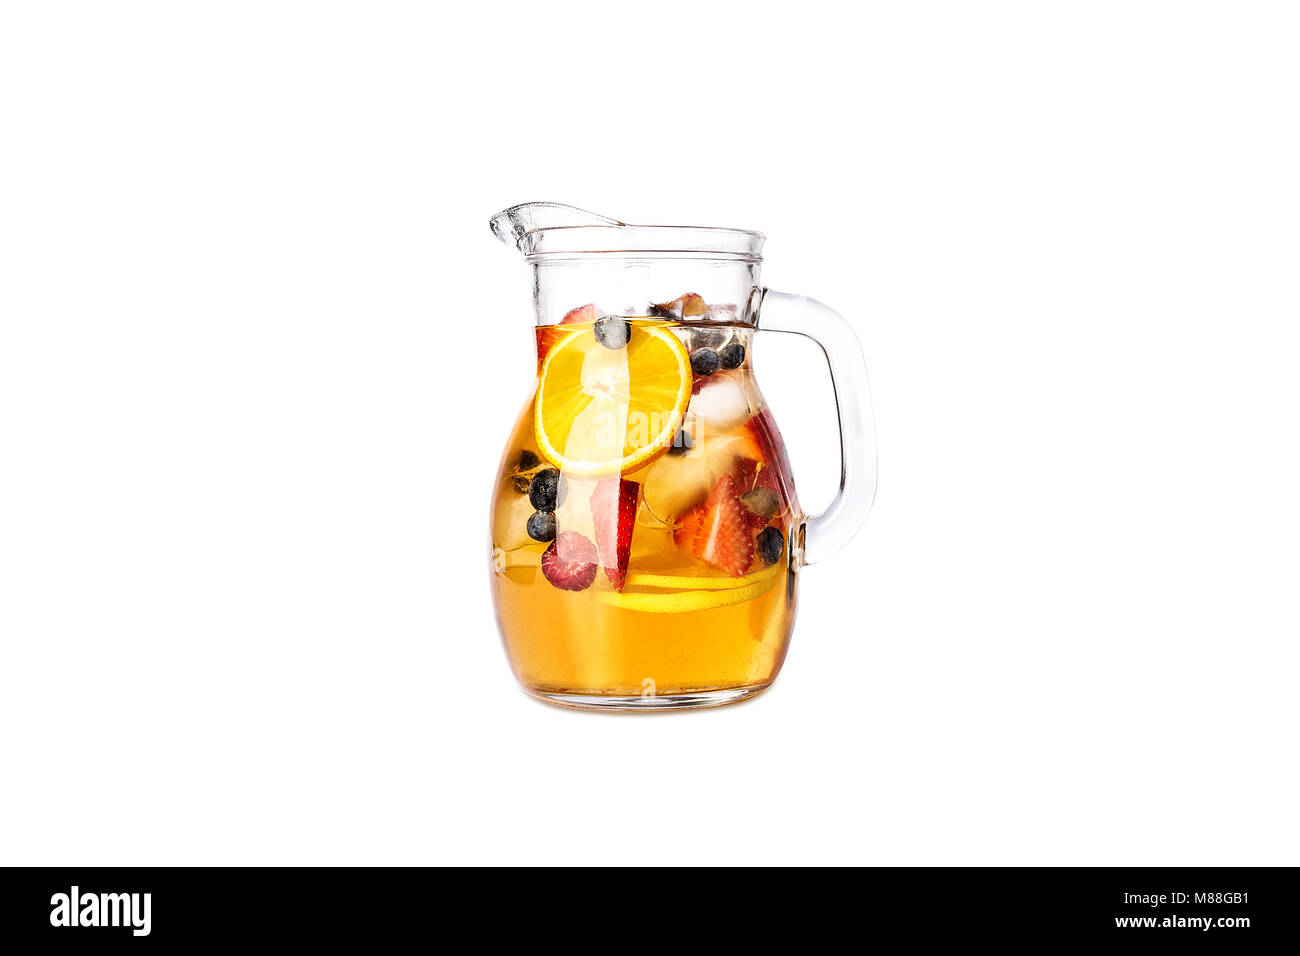 https://c8.alamy.com/comp/M88GB1/pitcher-of-drink-with-fruits-M88GB1.jpg